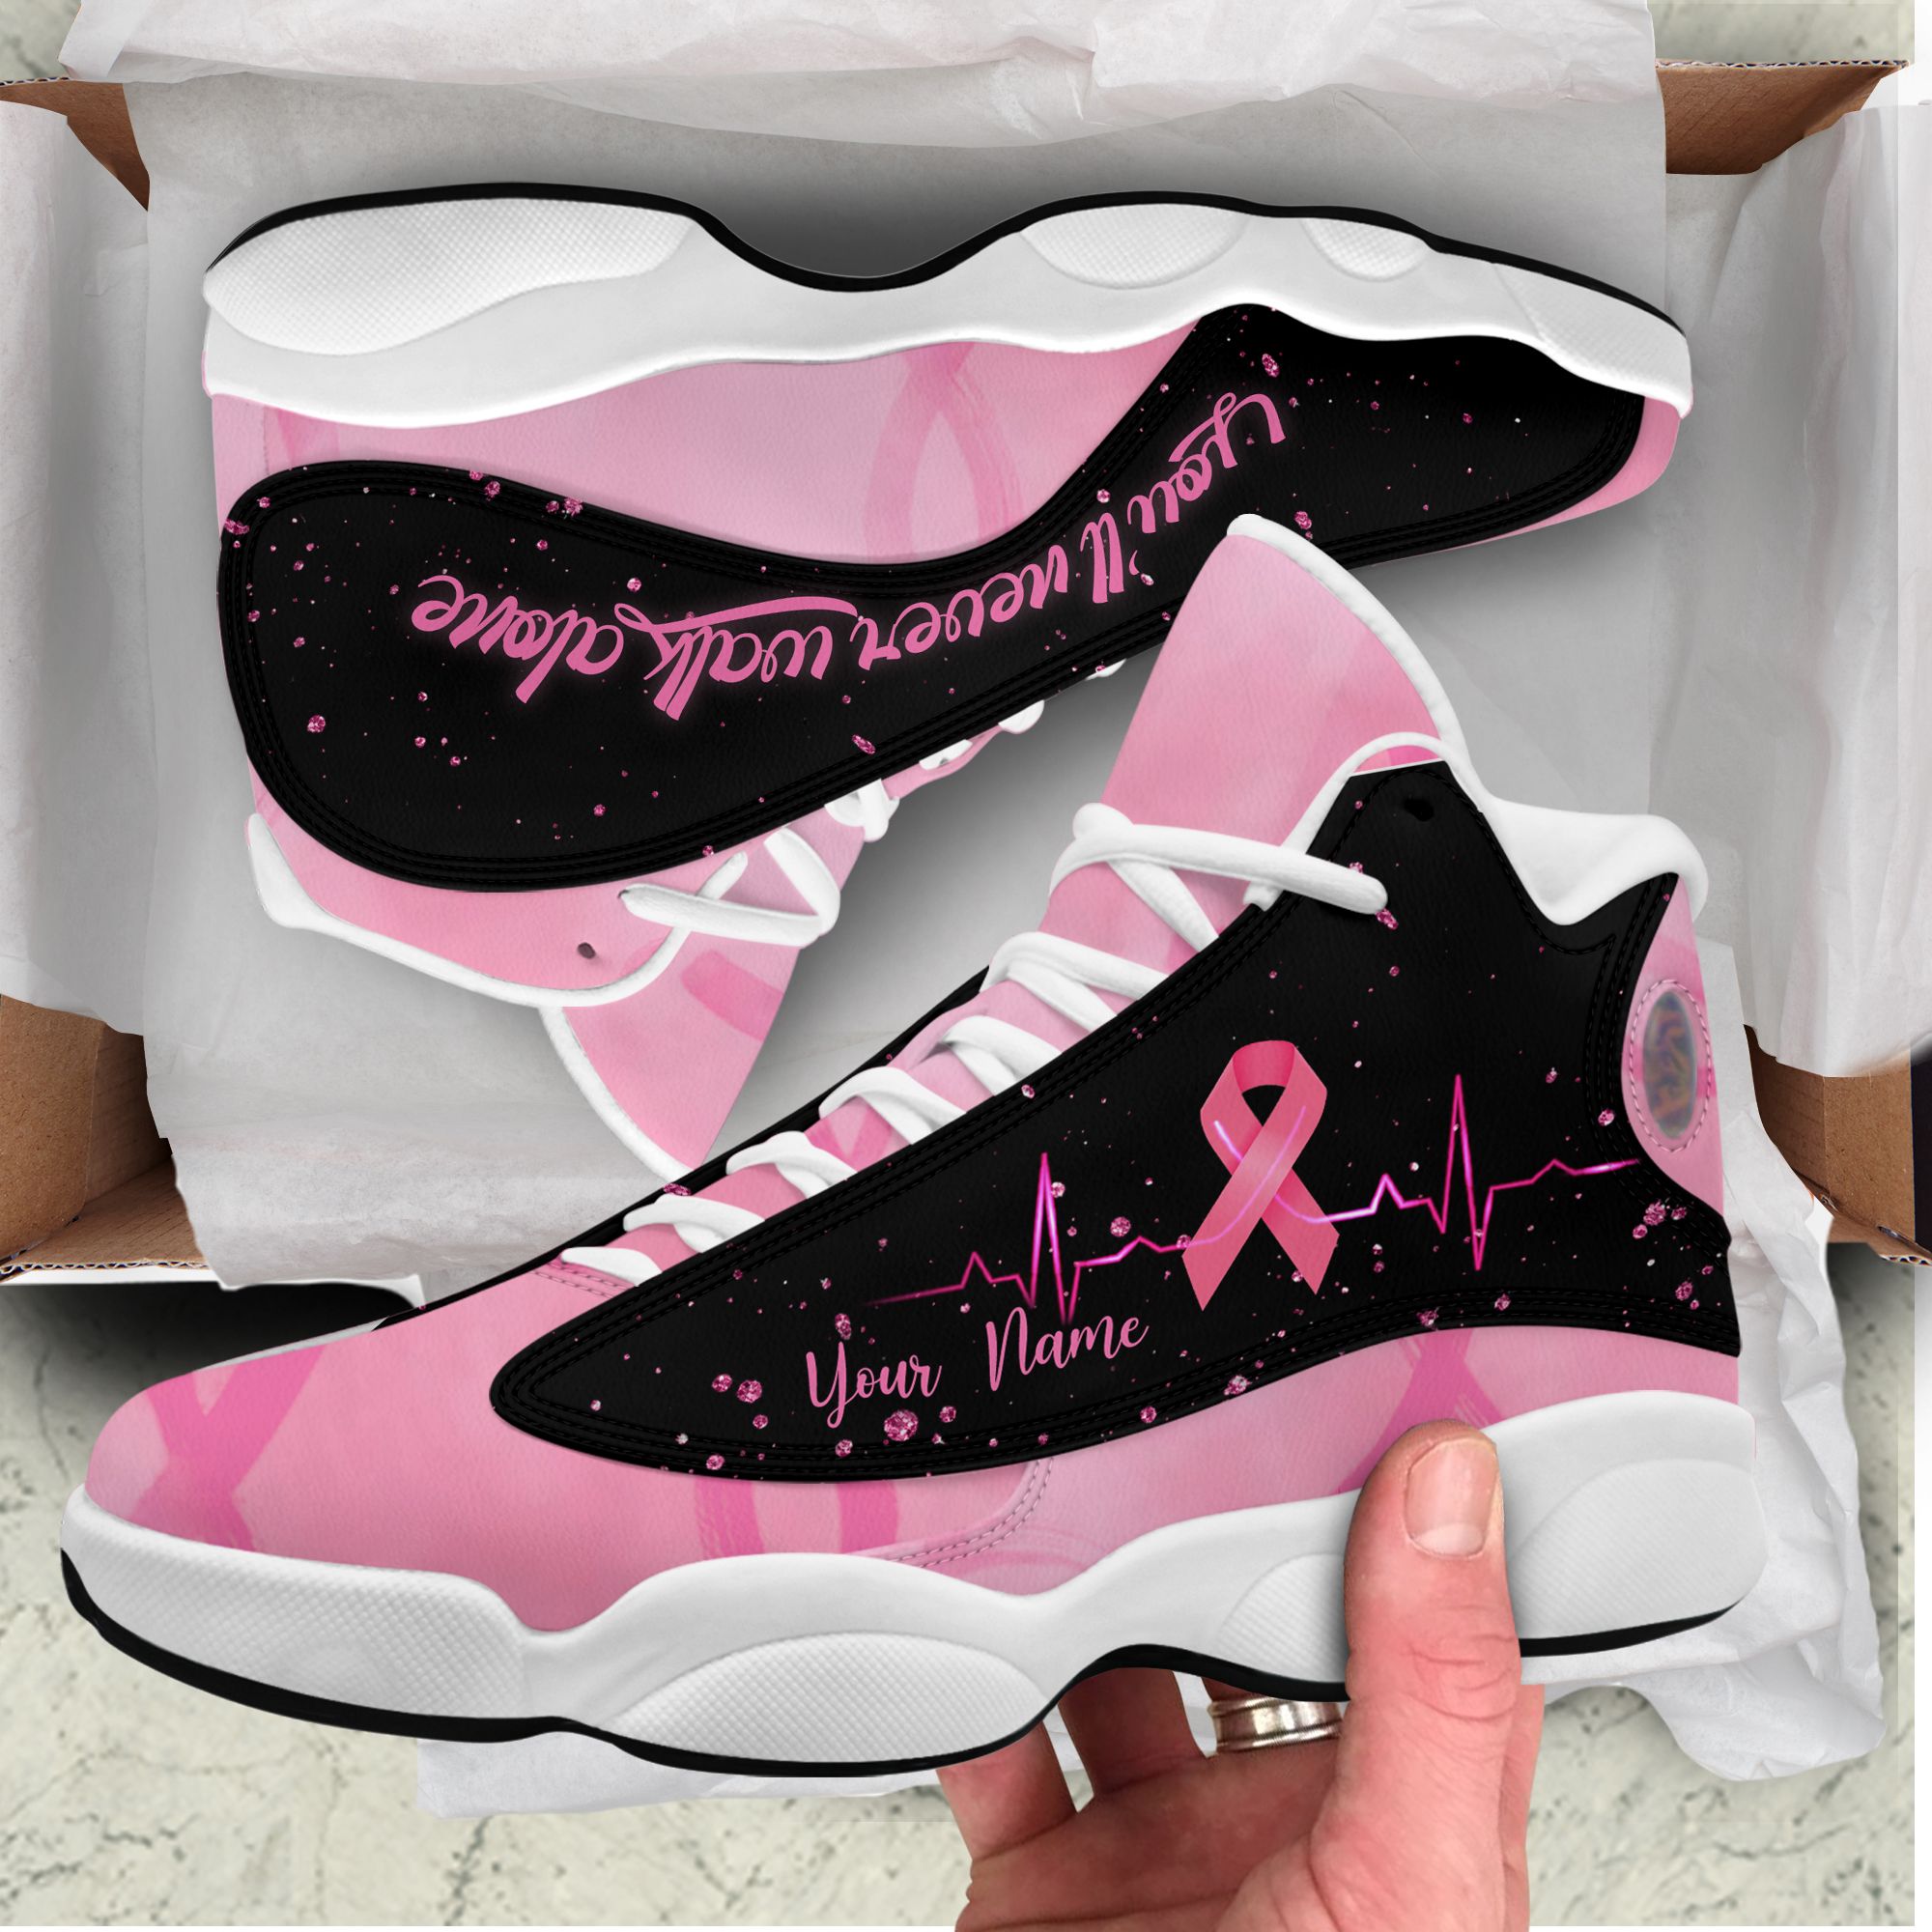 Breast Cancer heart beat you will never walk alone custom personalized name Air Jorden 13 shoes 1